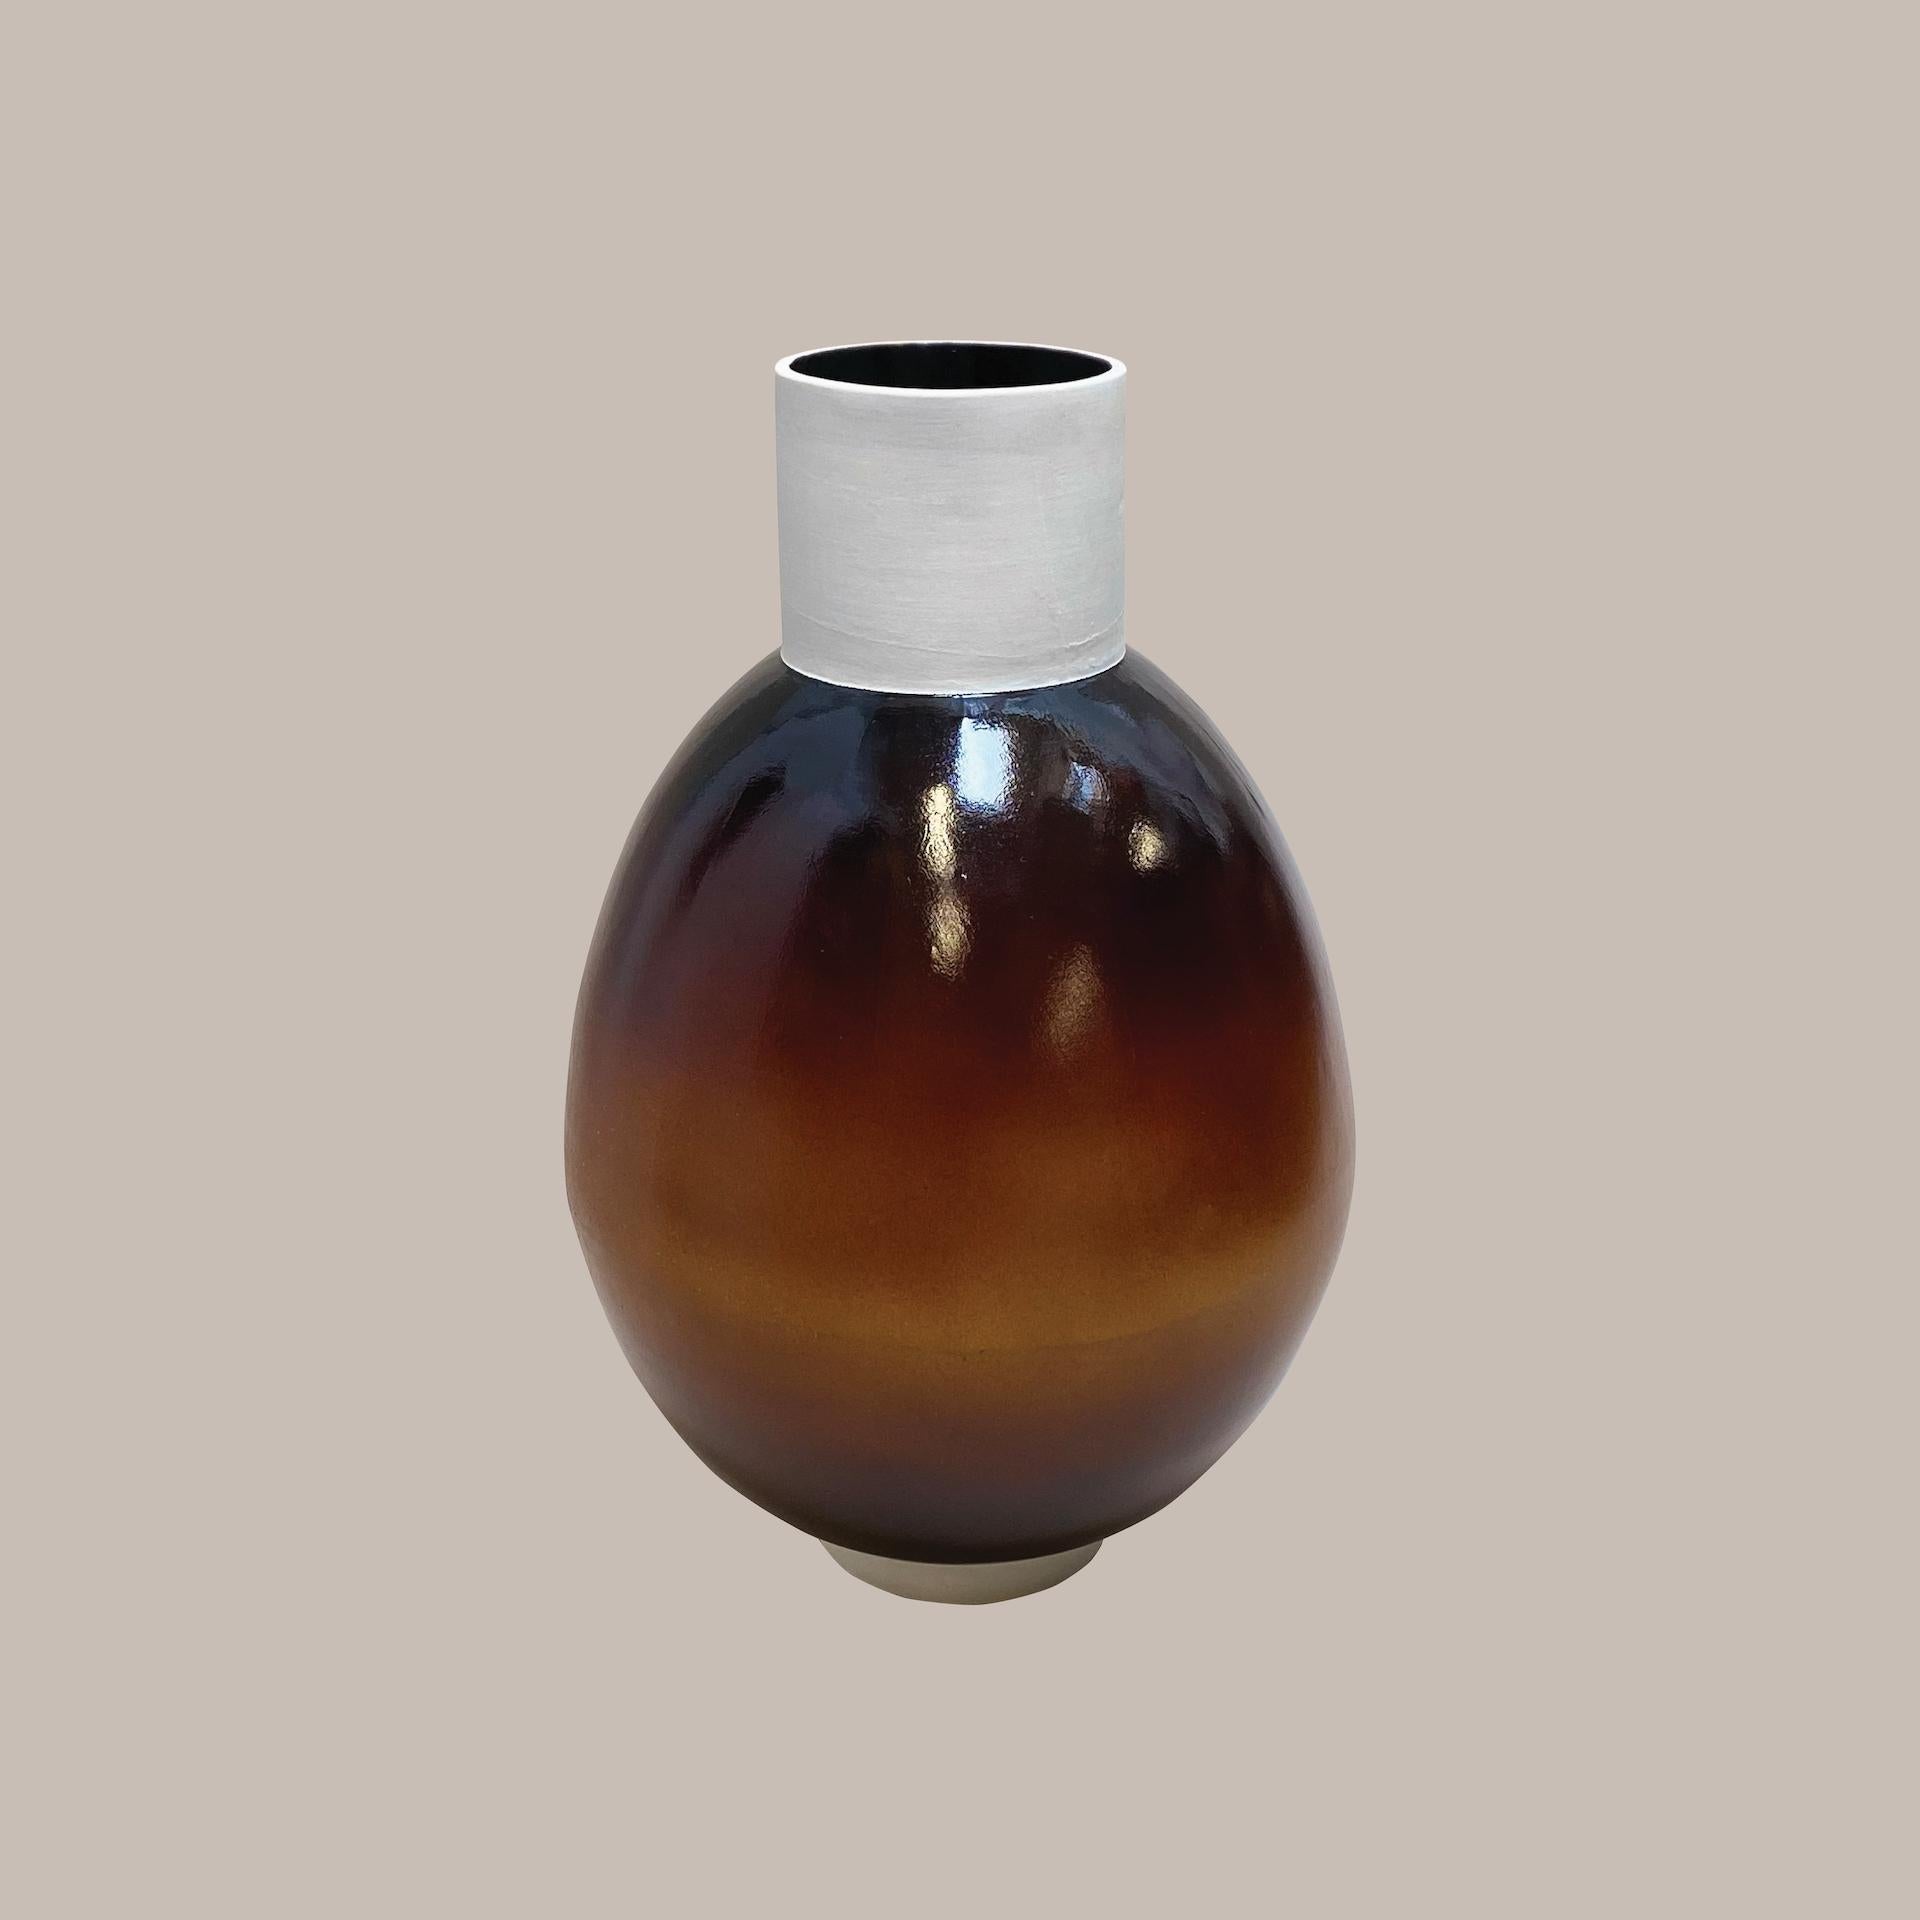 Ott another paradigmatic handmade ceramic vase by Studio Yoon Seok-hyeon
Dimensions: W 30 x H 30
Materials: Ott(Natural resin from Ott tree), porcelain
2.5kg

It is available to customize various colors in Ott's natural color range(brownish,